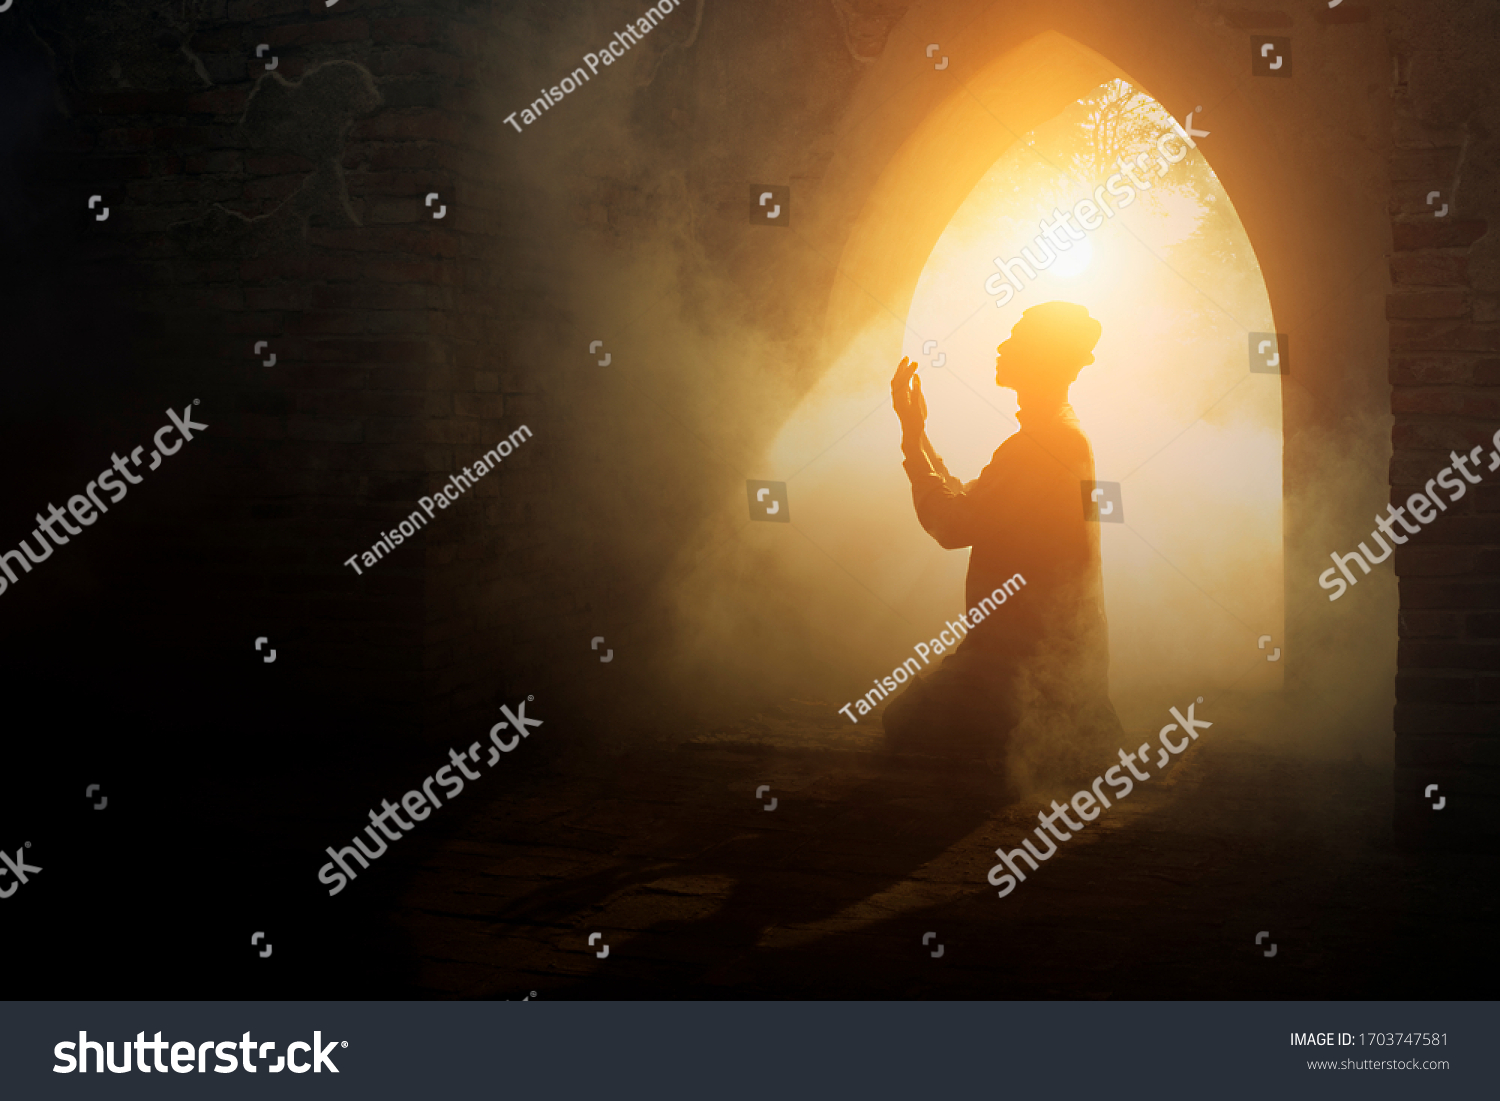 Silhouette of muslim man having worship and praying for fasting and Eid of Islam culture in old mosque with lighting and smoke background                                   #1703747581